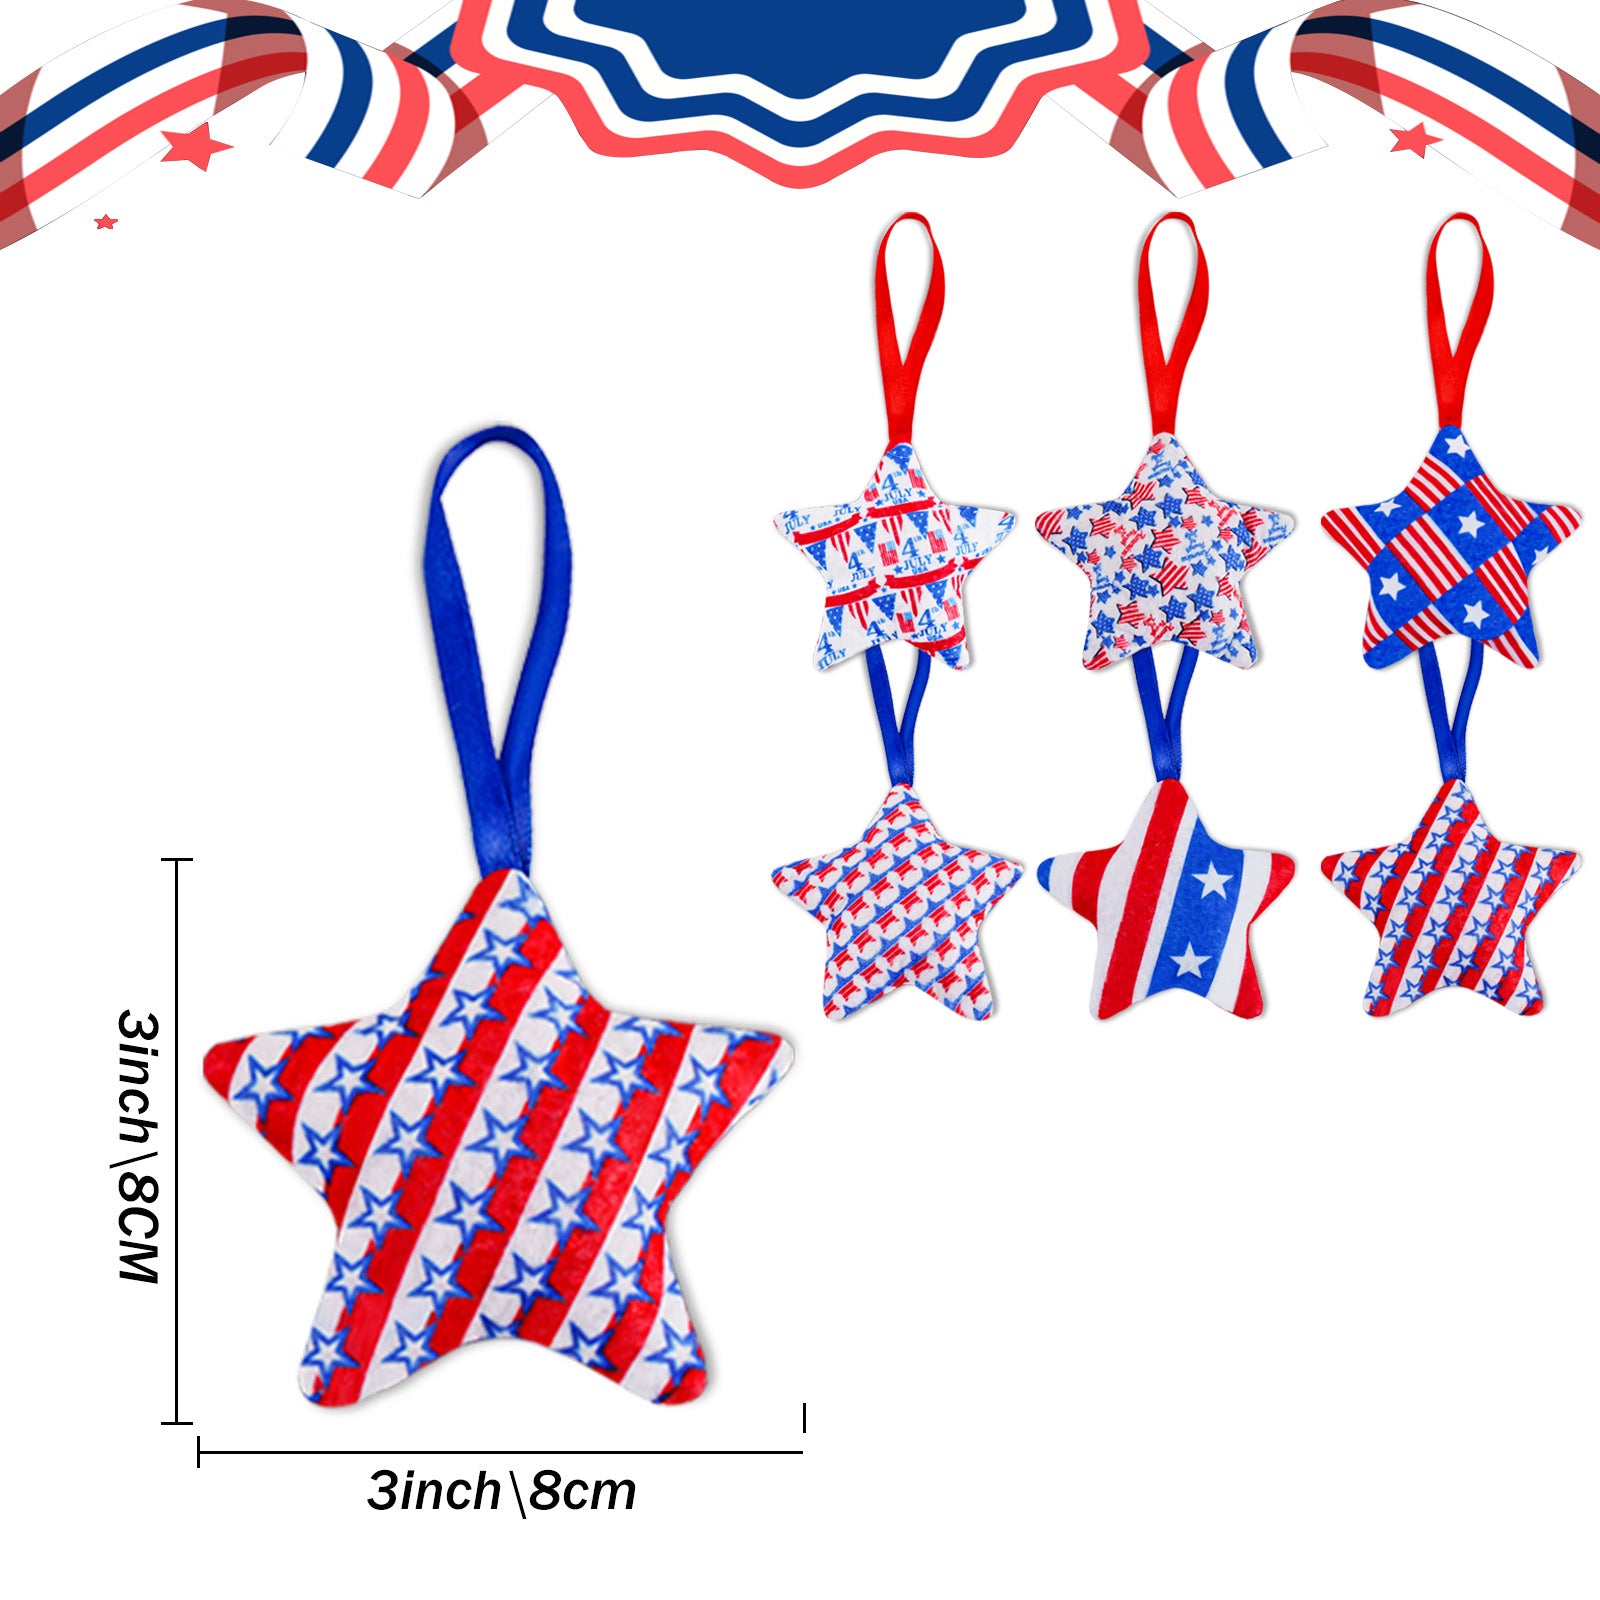 American Independence Day Love Cotton Five-star Modeling Decorations Pendant, 4th of July decorations, American flag decorations, Patriotic decorations, Red, white and blue decorations, July 4th wreaths, July 4th garlands, July 4th centerpieces, Fireworks decorations, July 4th banners,